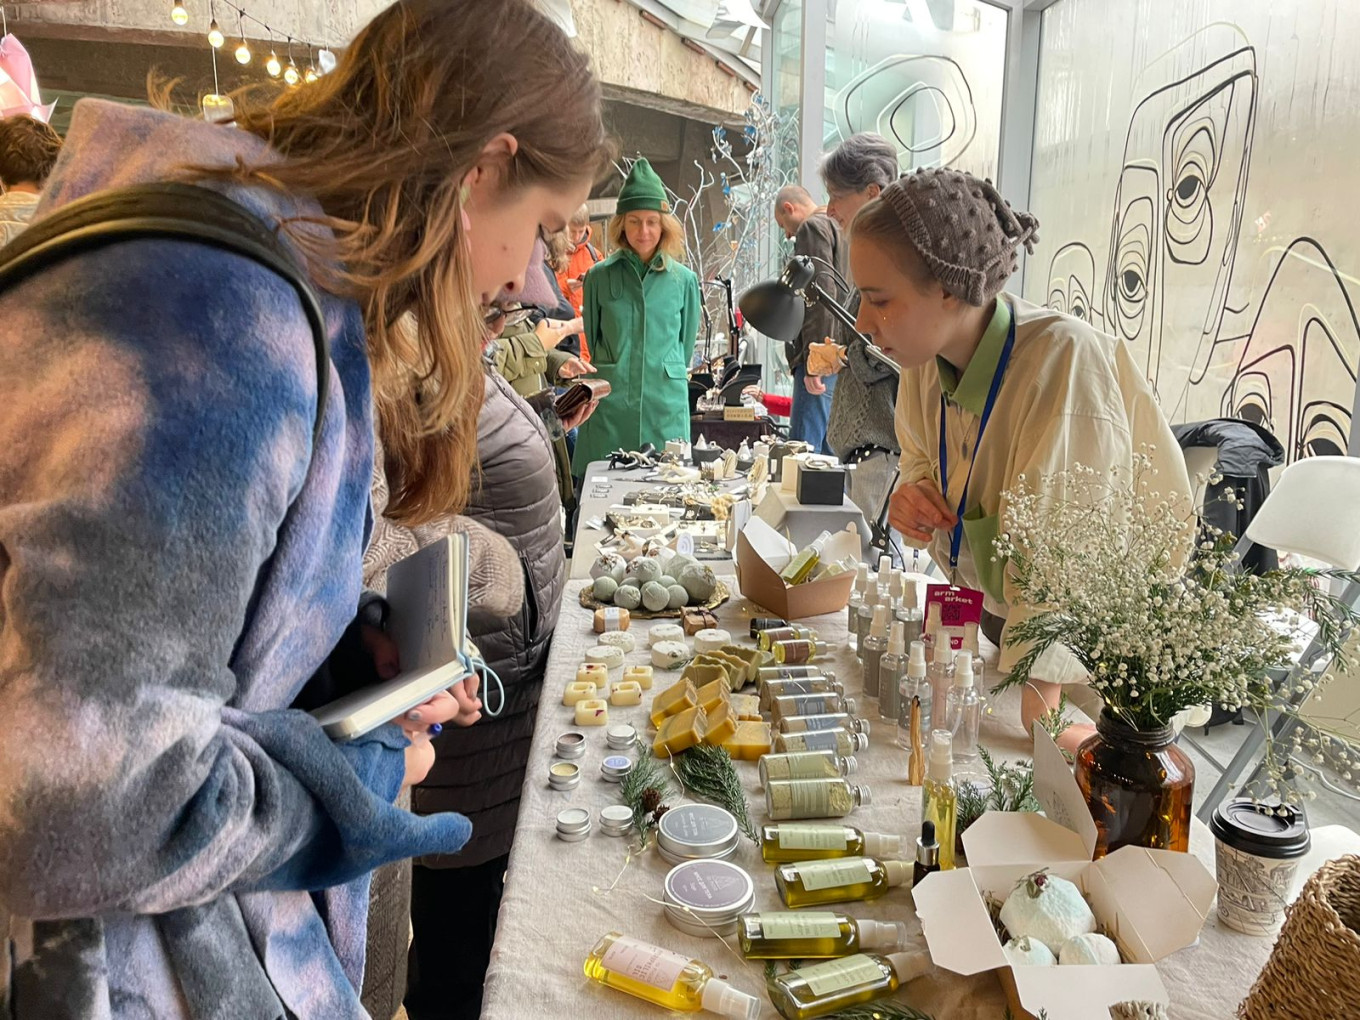 
					The booth for Moscow-based natural cosmetics brand La Hoja, which opened an Armenian location in October, at a recent craft and clothing fair in Yerevan					 					Samantha Berkhead / MT				